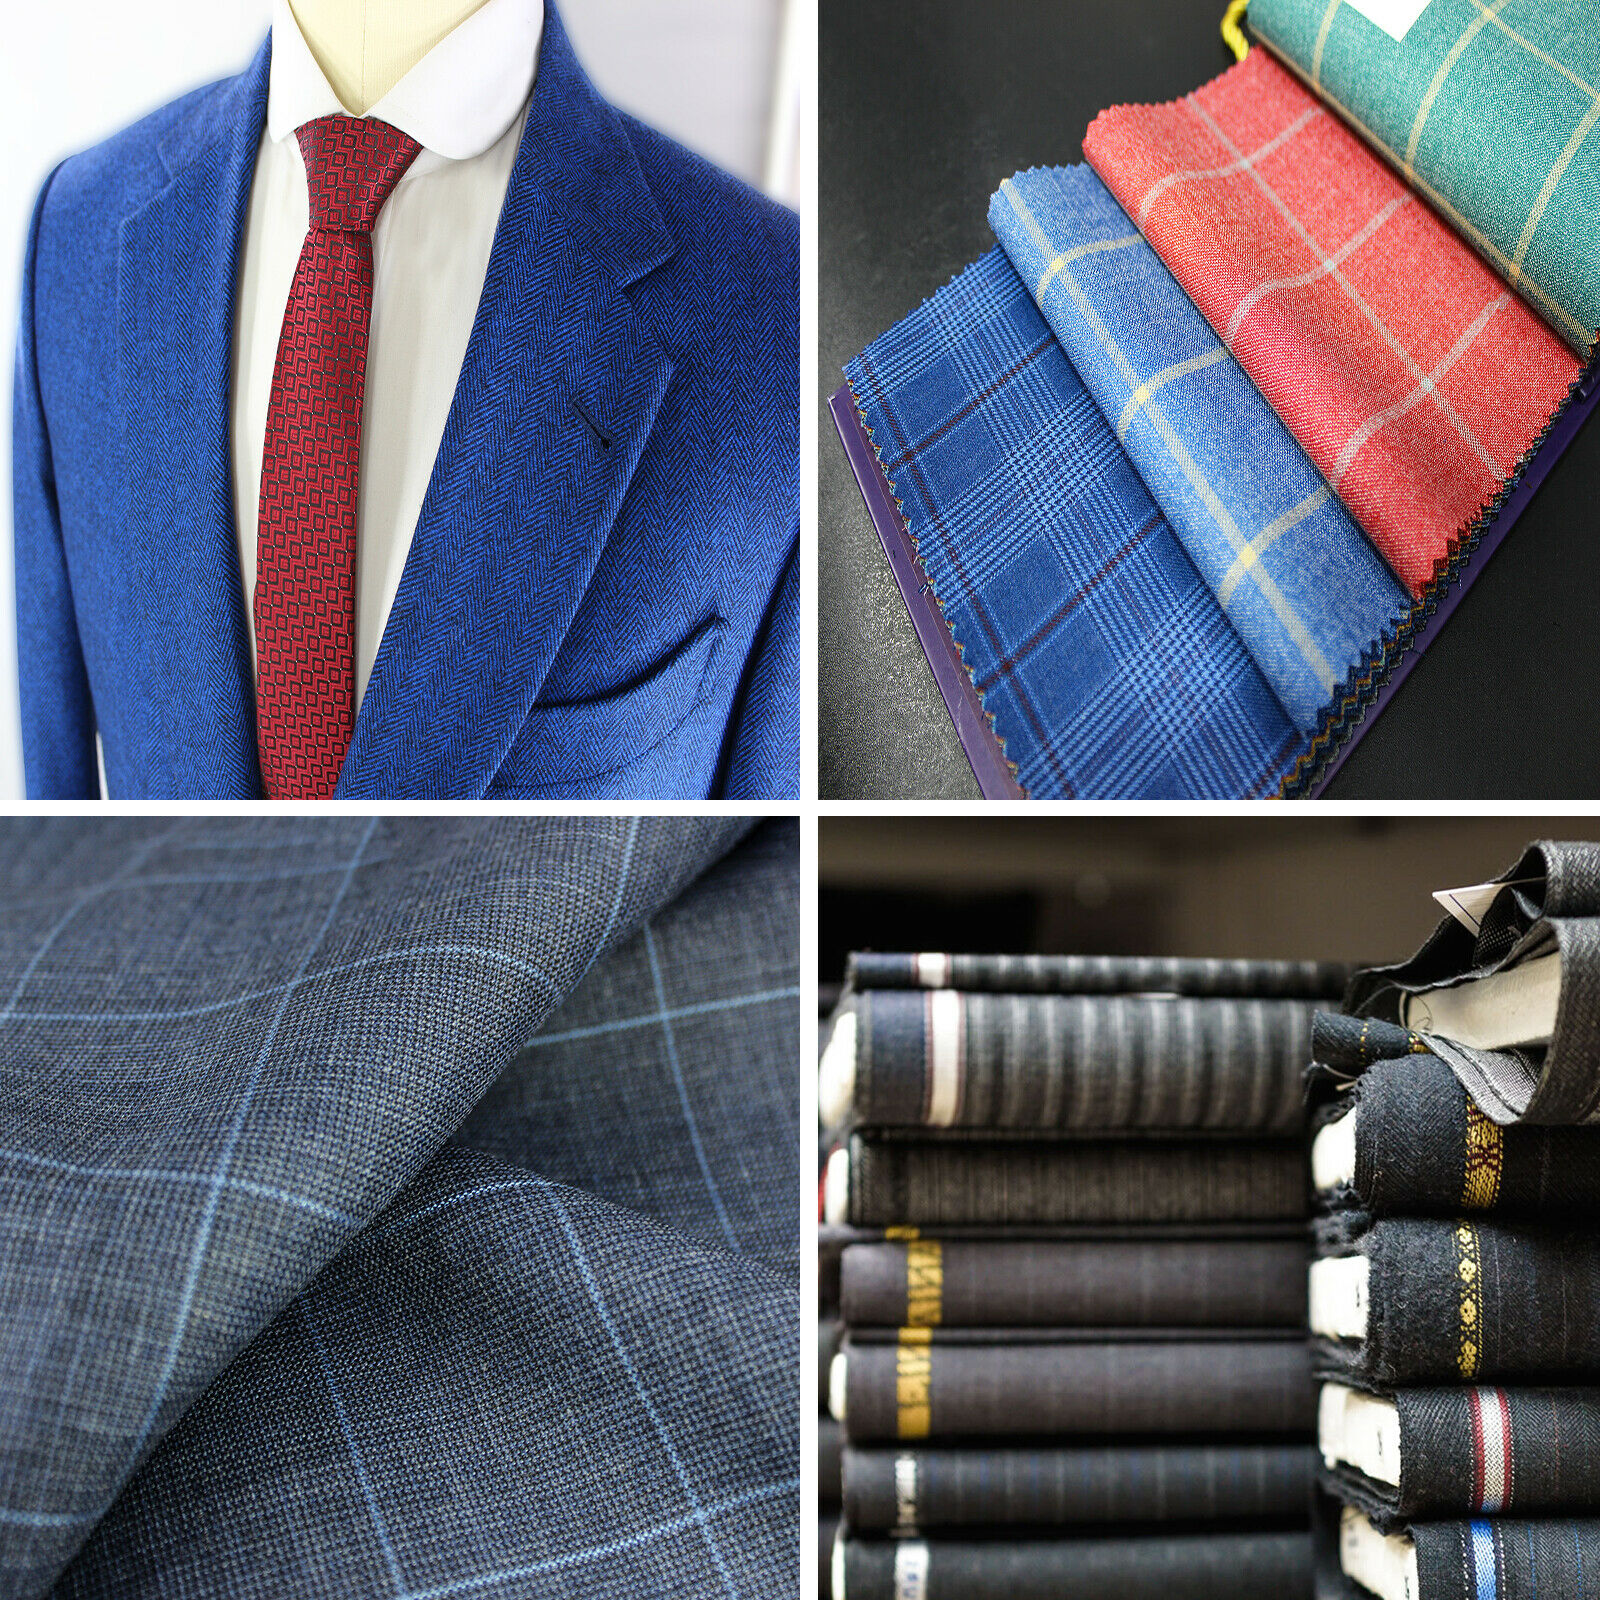 Tired Of Ill-fitting Suits? Create Custom Made To Measure Bespoke Suit That Fits